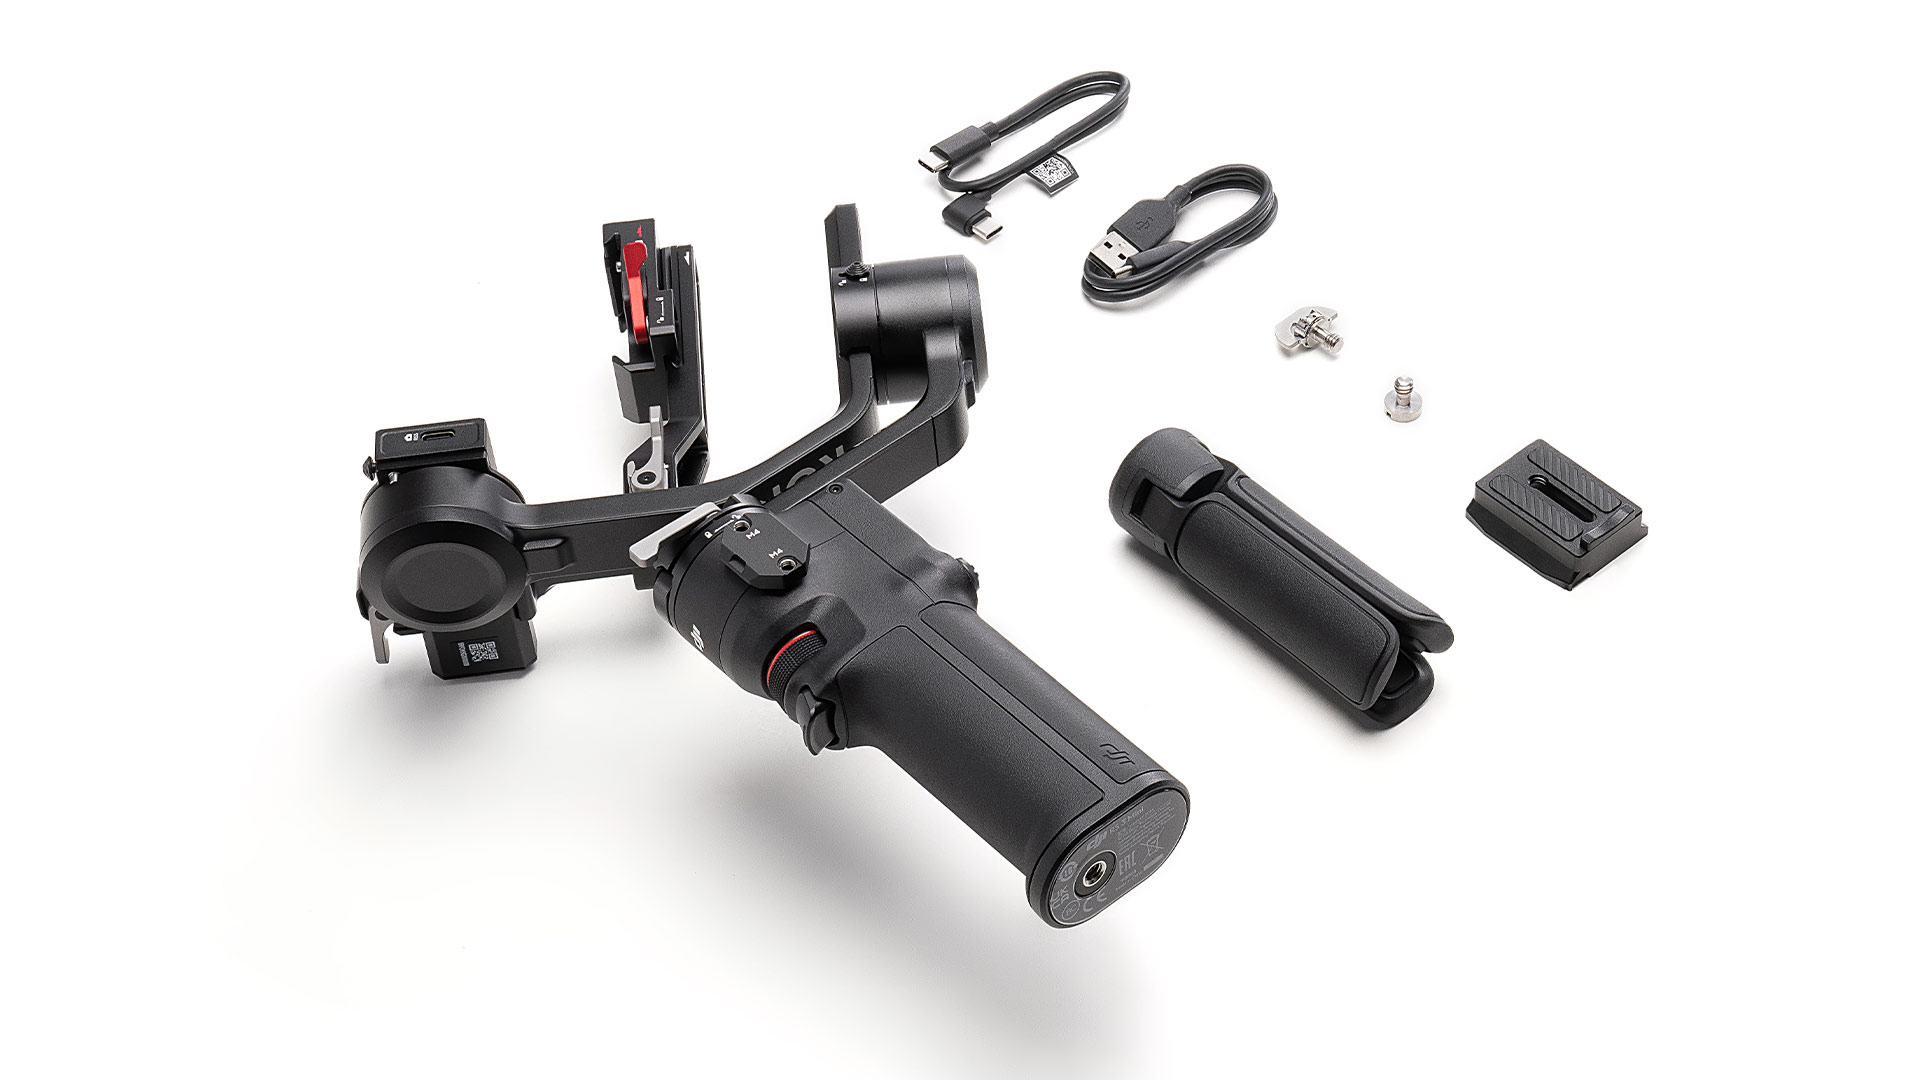 DJI RS 3 Mini Announced – Lightweight Gimbal with Easier Vertical